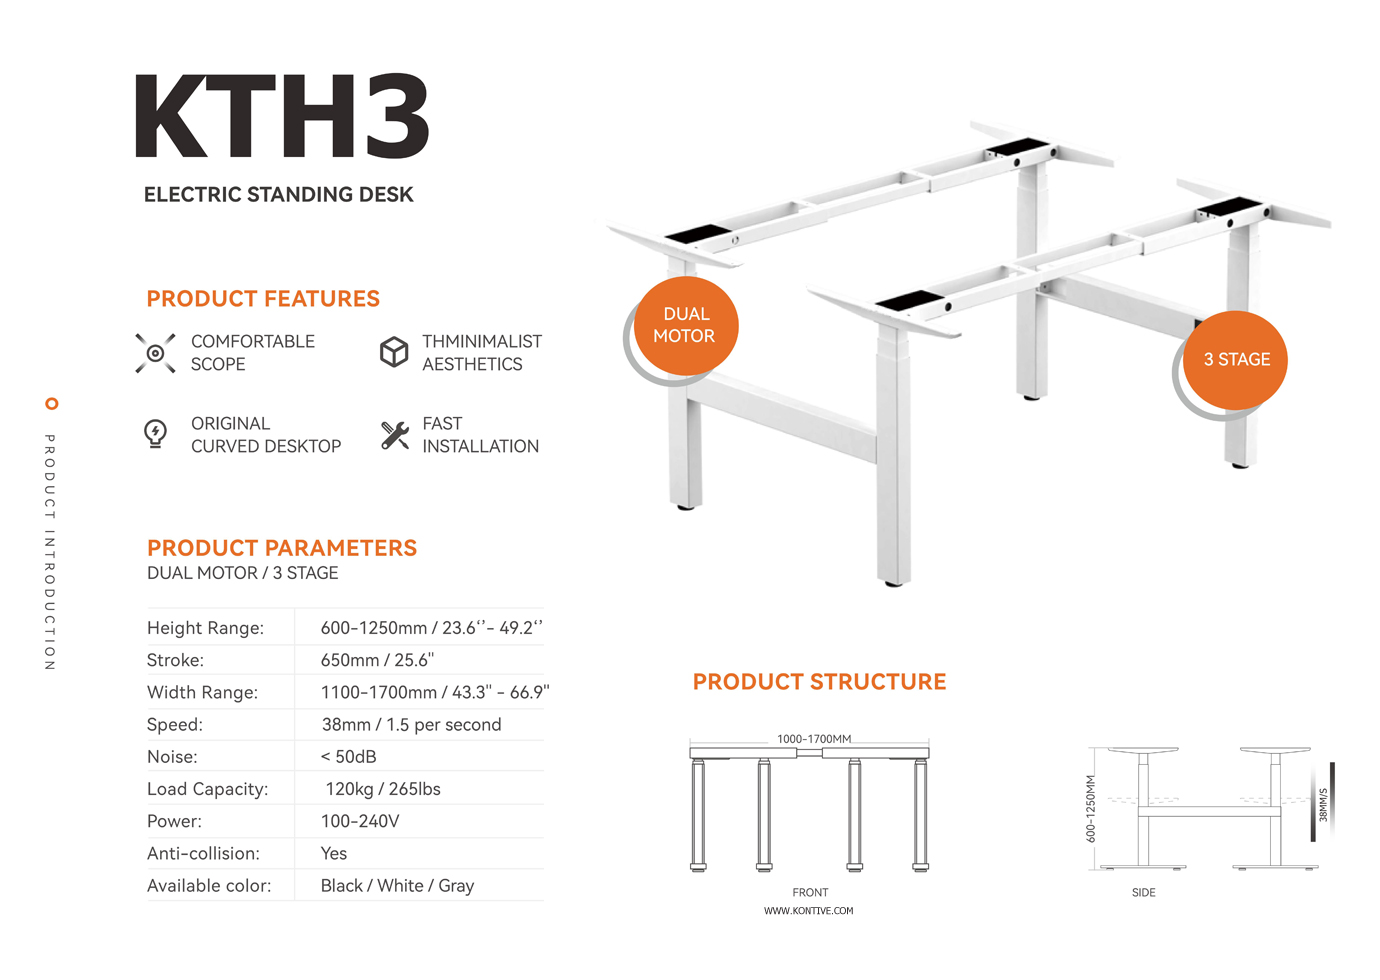 Sit-stand Bench System 3 Stage Dual Motor Electric Standing Desk Frame KTH3 Specification